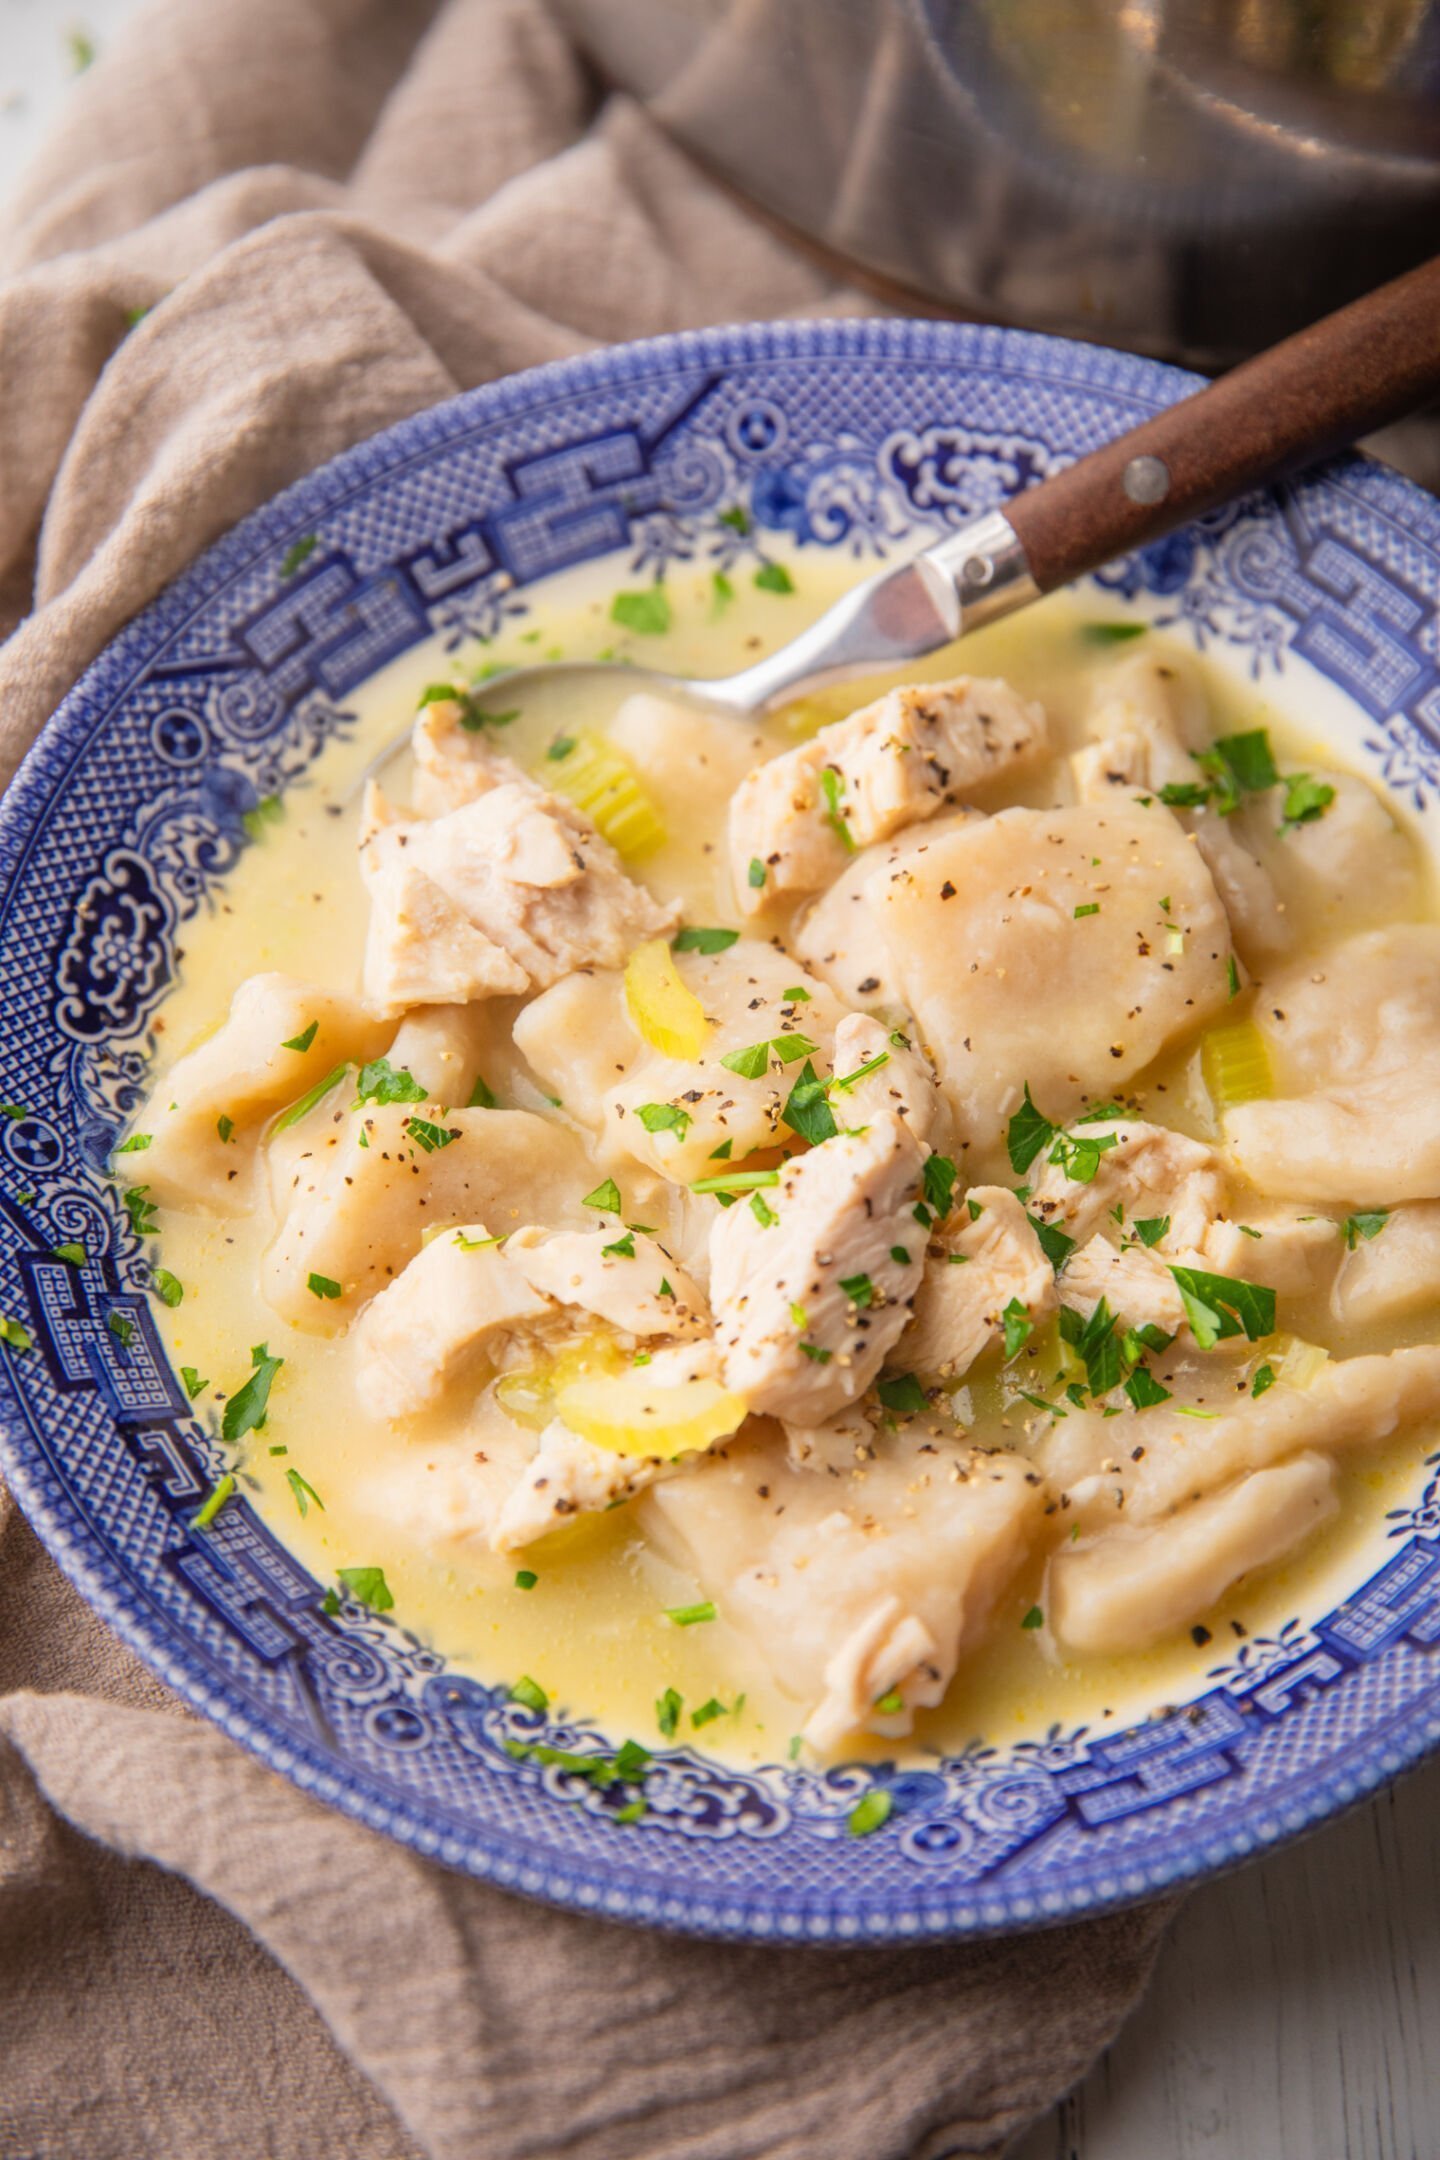 Scoop the soup and dumplings into serving bowls, season with salt and pepper, and chopped fresh parsley